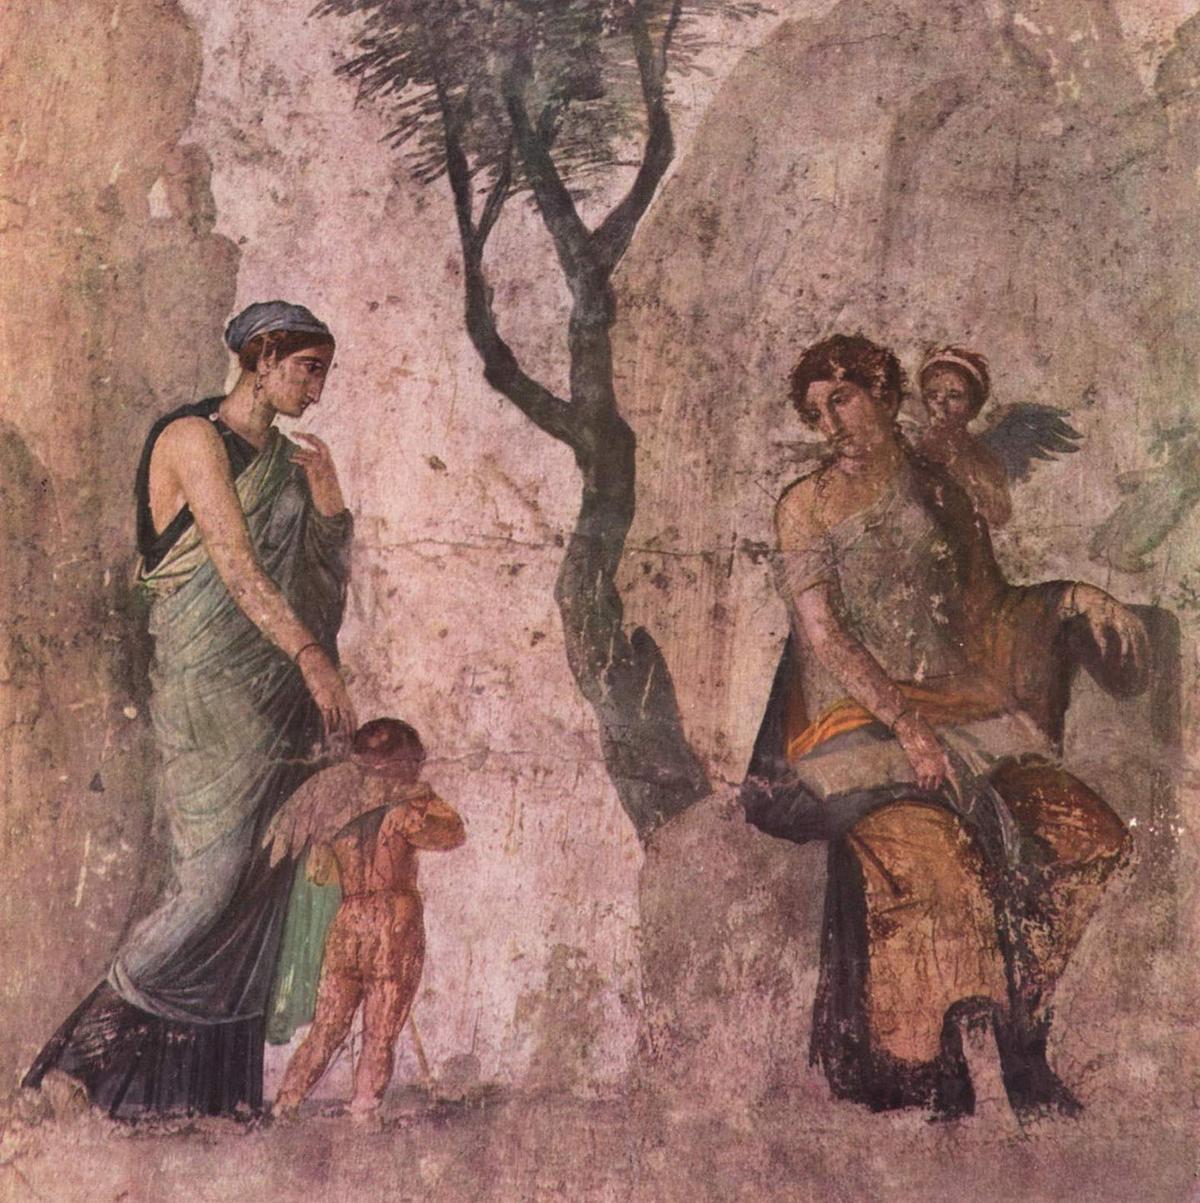 A weeping Eros is brought back by a maid to his mother Venus who had punished him for igniting Mars’s desire for another woman. “Eros Punished,” circa 25 B.C., by a Pompeian painter. National Archaeological Museum of Naples, Italy. (Public Domain)